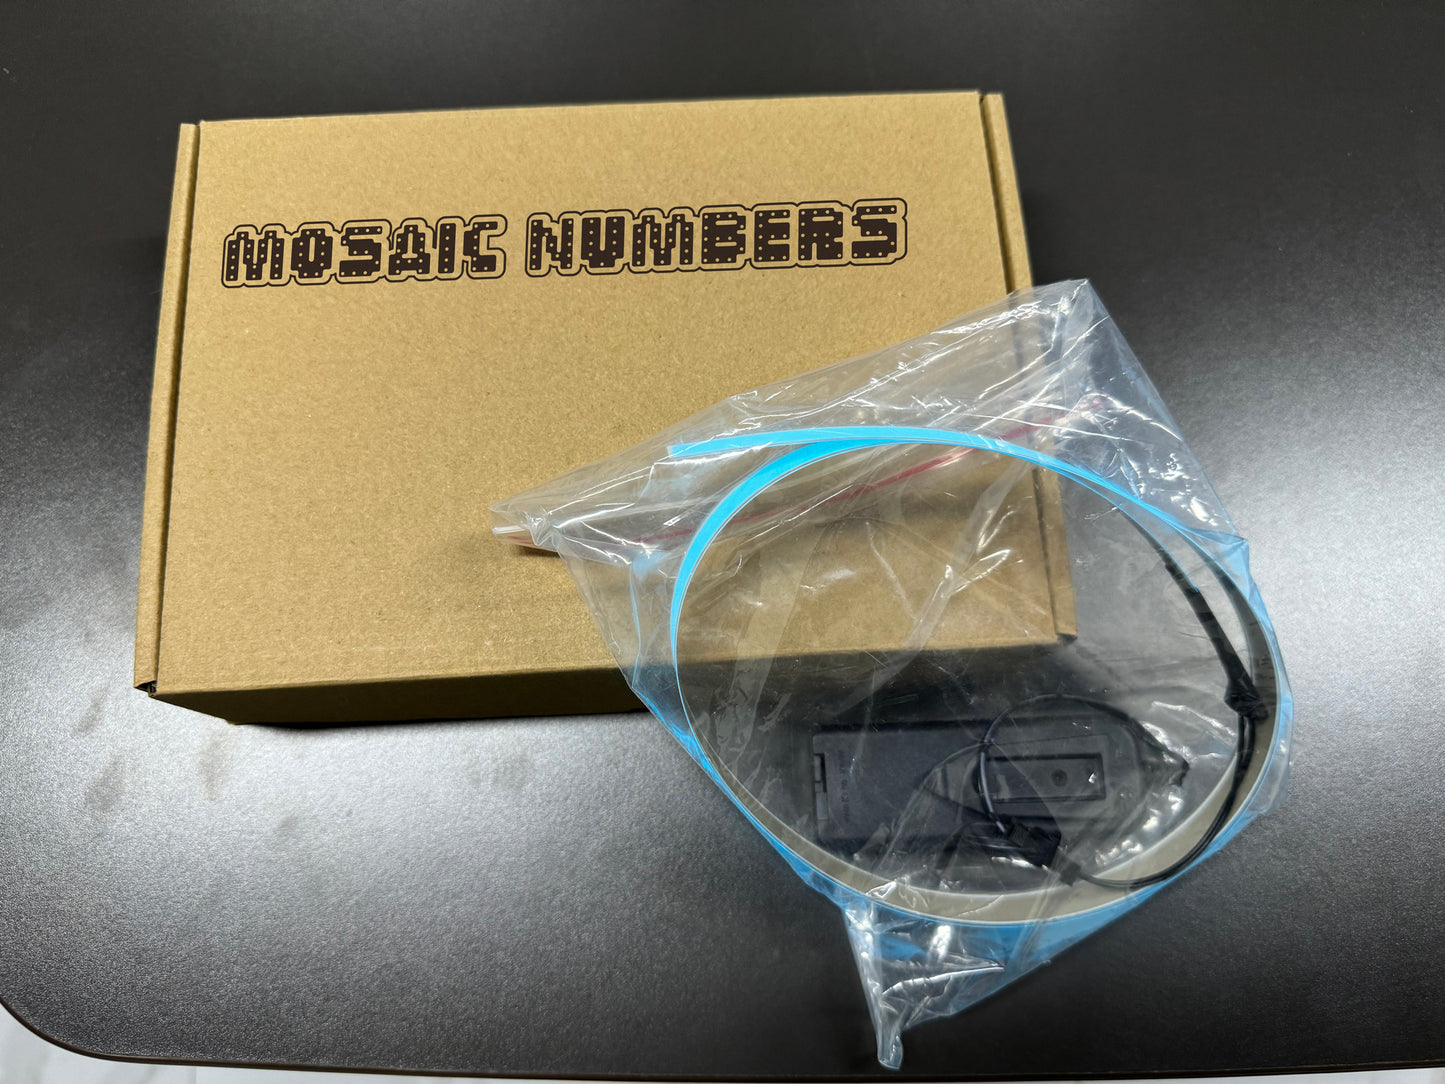 Mosaic Numbers LED Light Strips for Decorative Purposes RGB LED Strip Lights